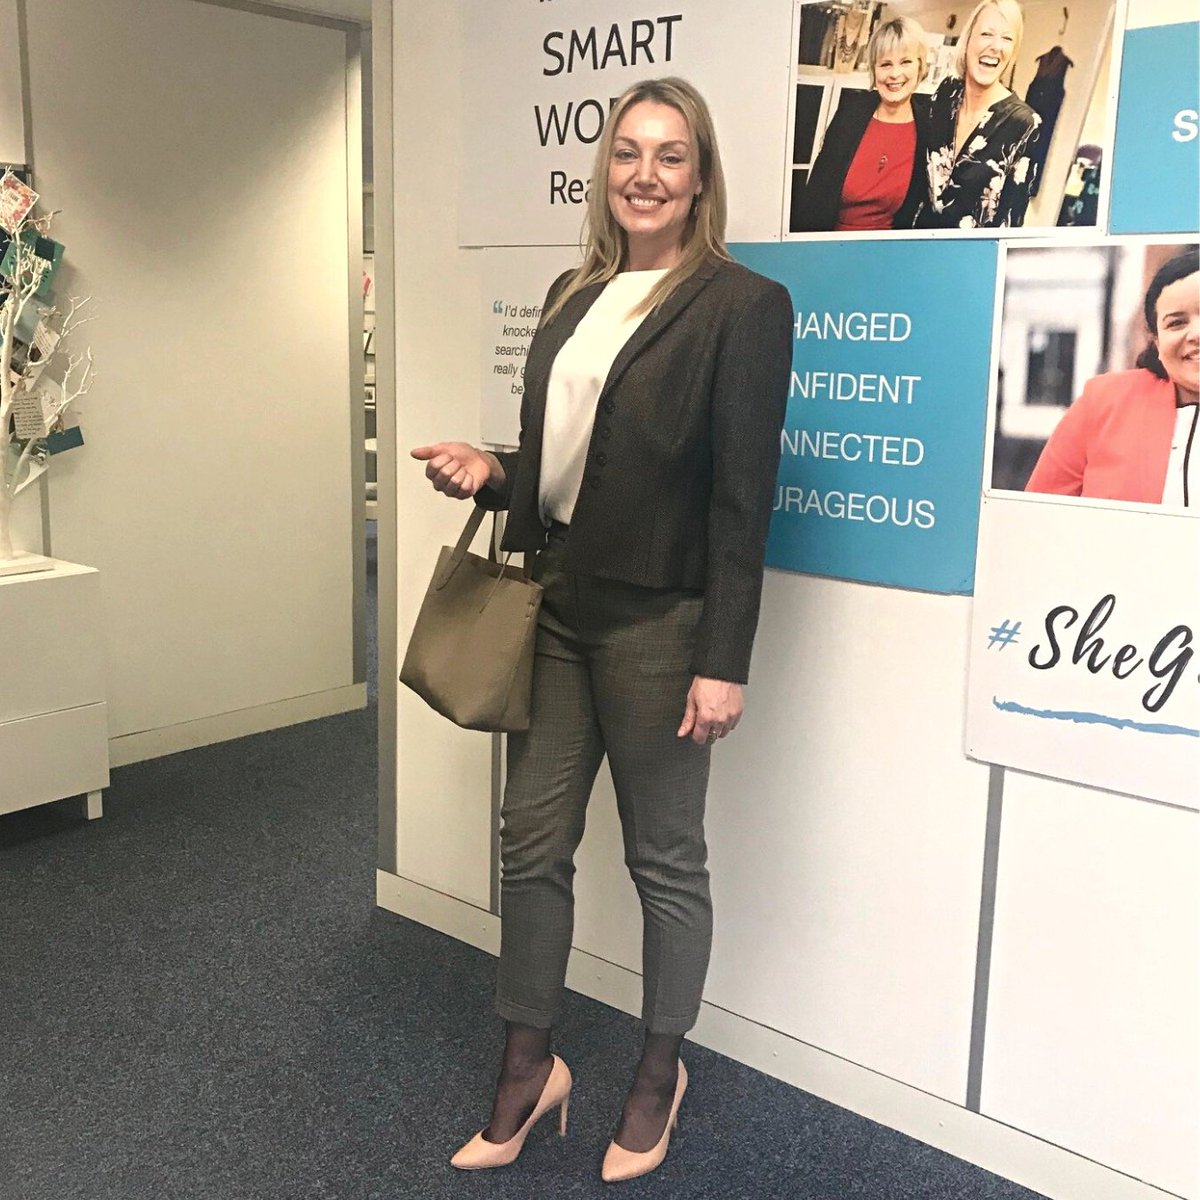 SHE GOT THE JOB⭐
We are delighted to announce Sarah has got the job as the Procurement Lead!
Please join us in congratulating Sarah and wishing her the best of luck in her new job.

#interviewsuccess #femaleemployment #shegotthejob #smartworks #smartworksrdg #CareerGoals #newjob